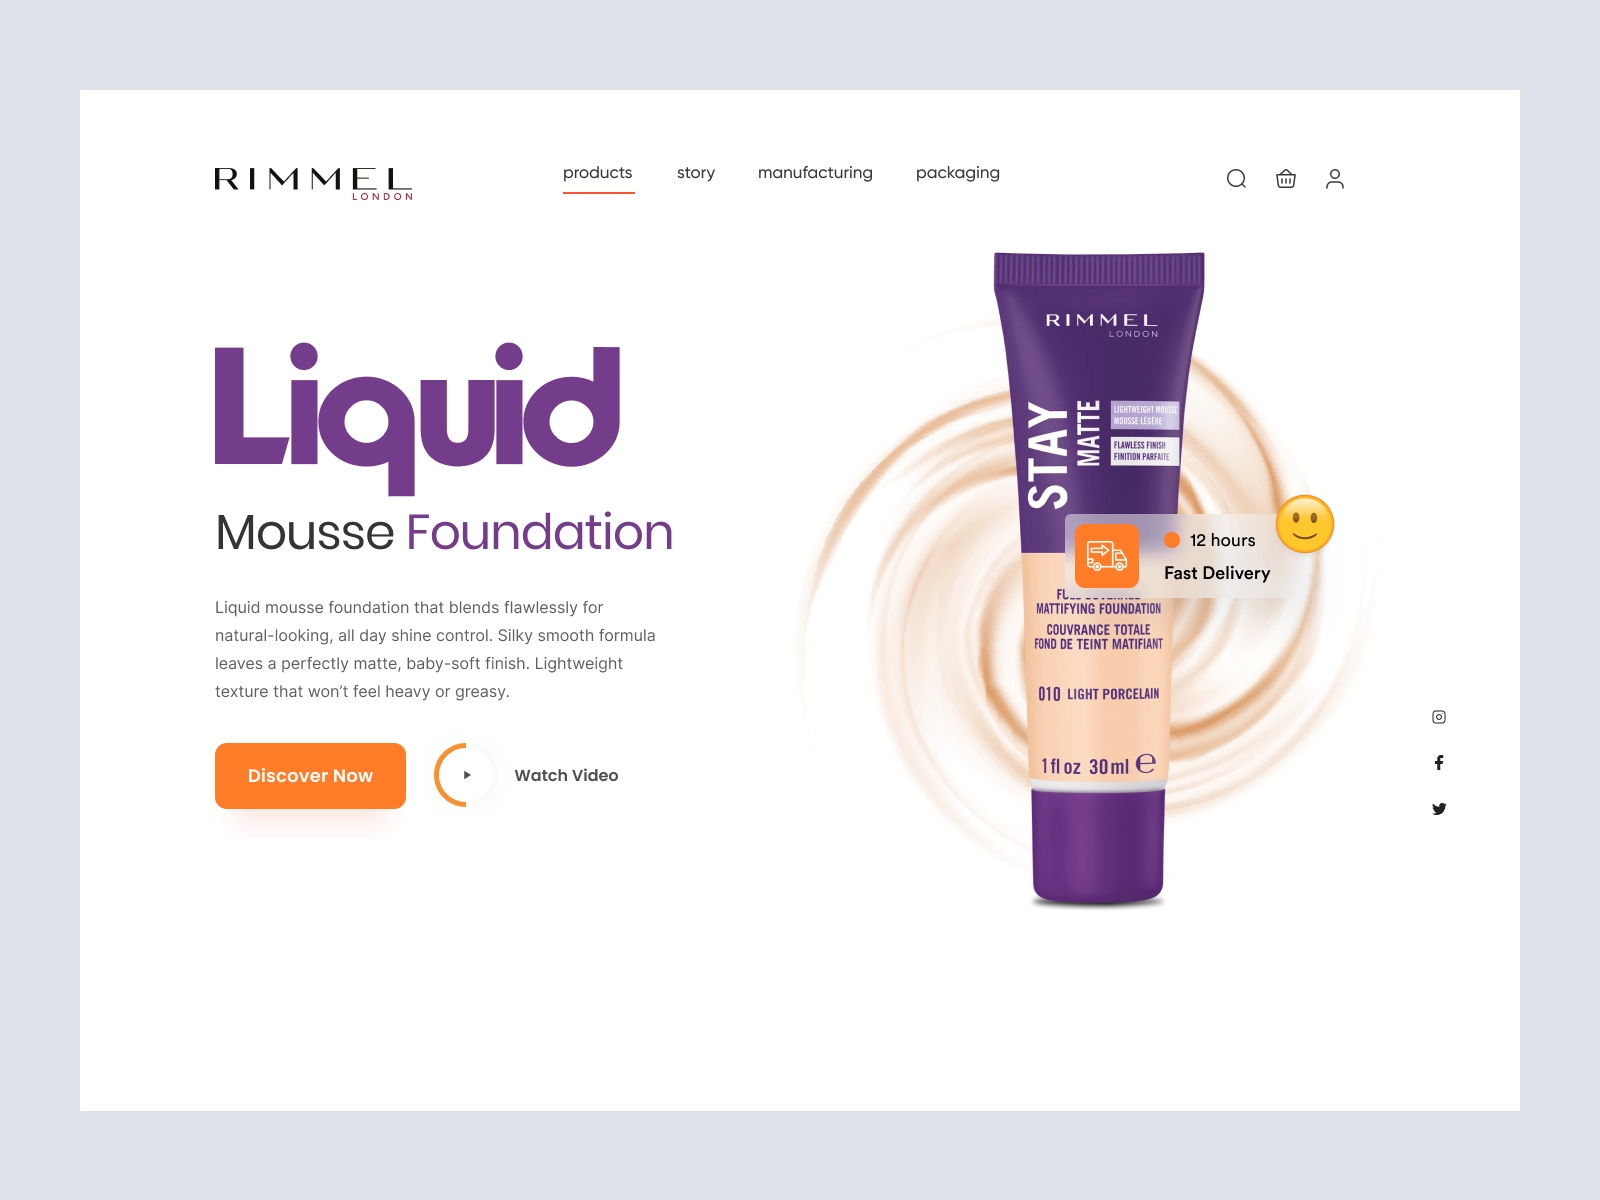 RIMMEL - Shopify Store Design for Cosmetics Products for Adobe XD - screen 1